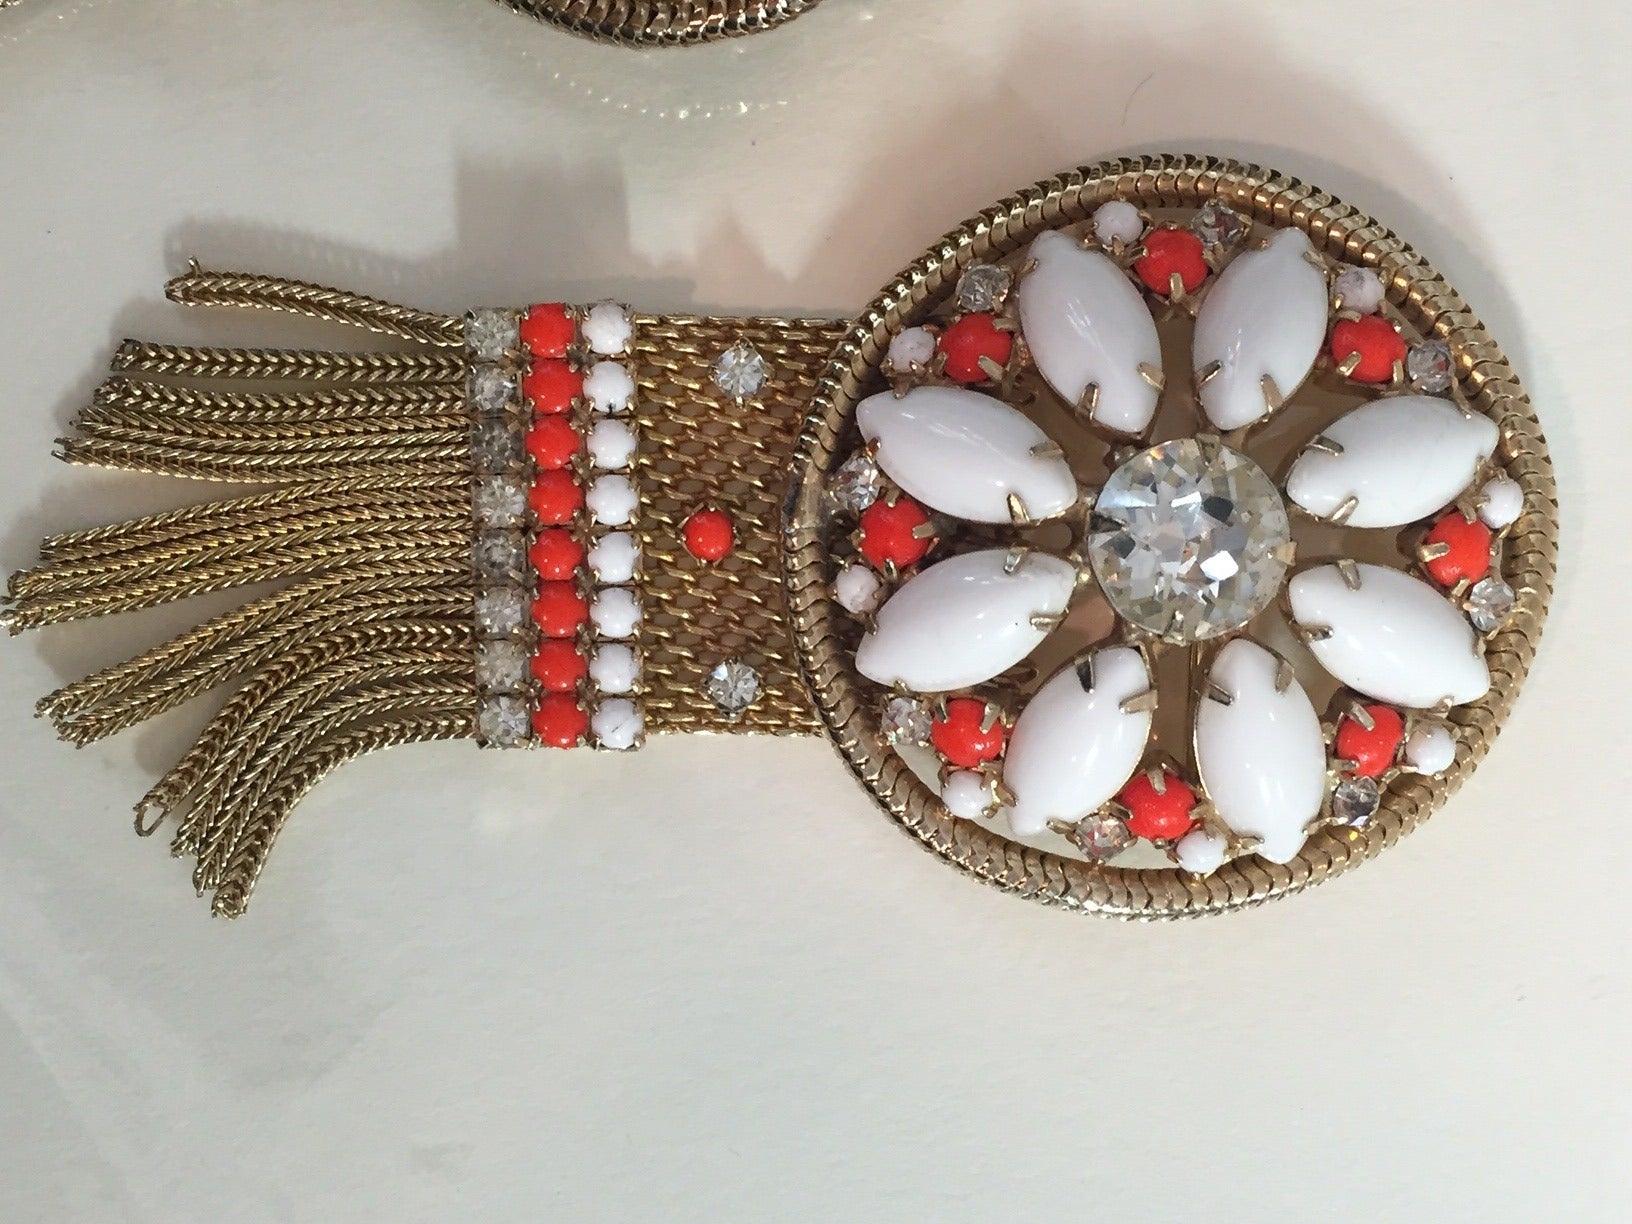 A wonderful 1960s Hobe milkglass and faux coral rhinestone cuff and brooch set:  Chain link mess and chain fringe.